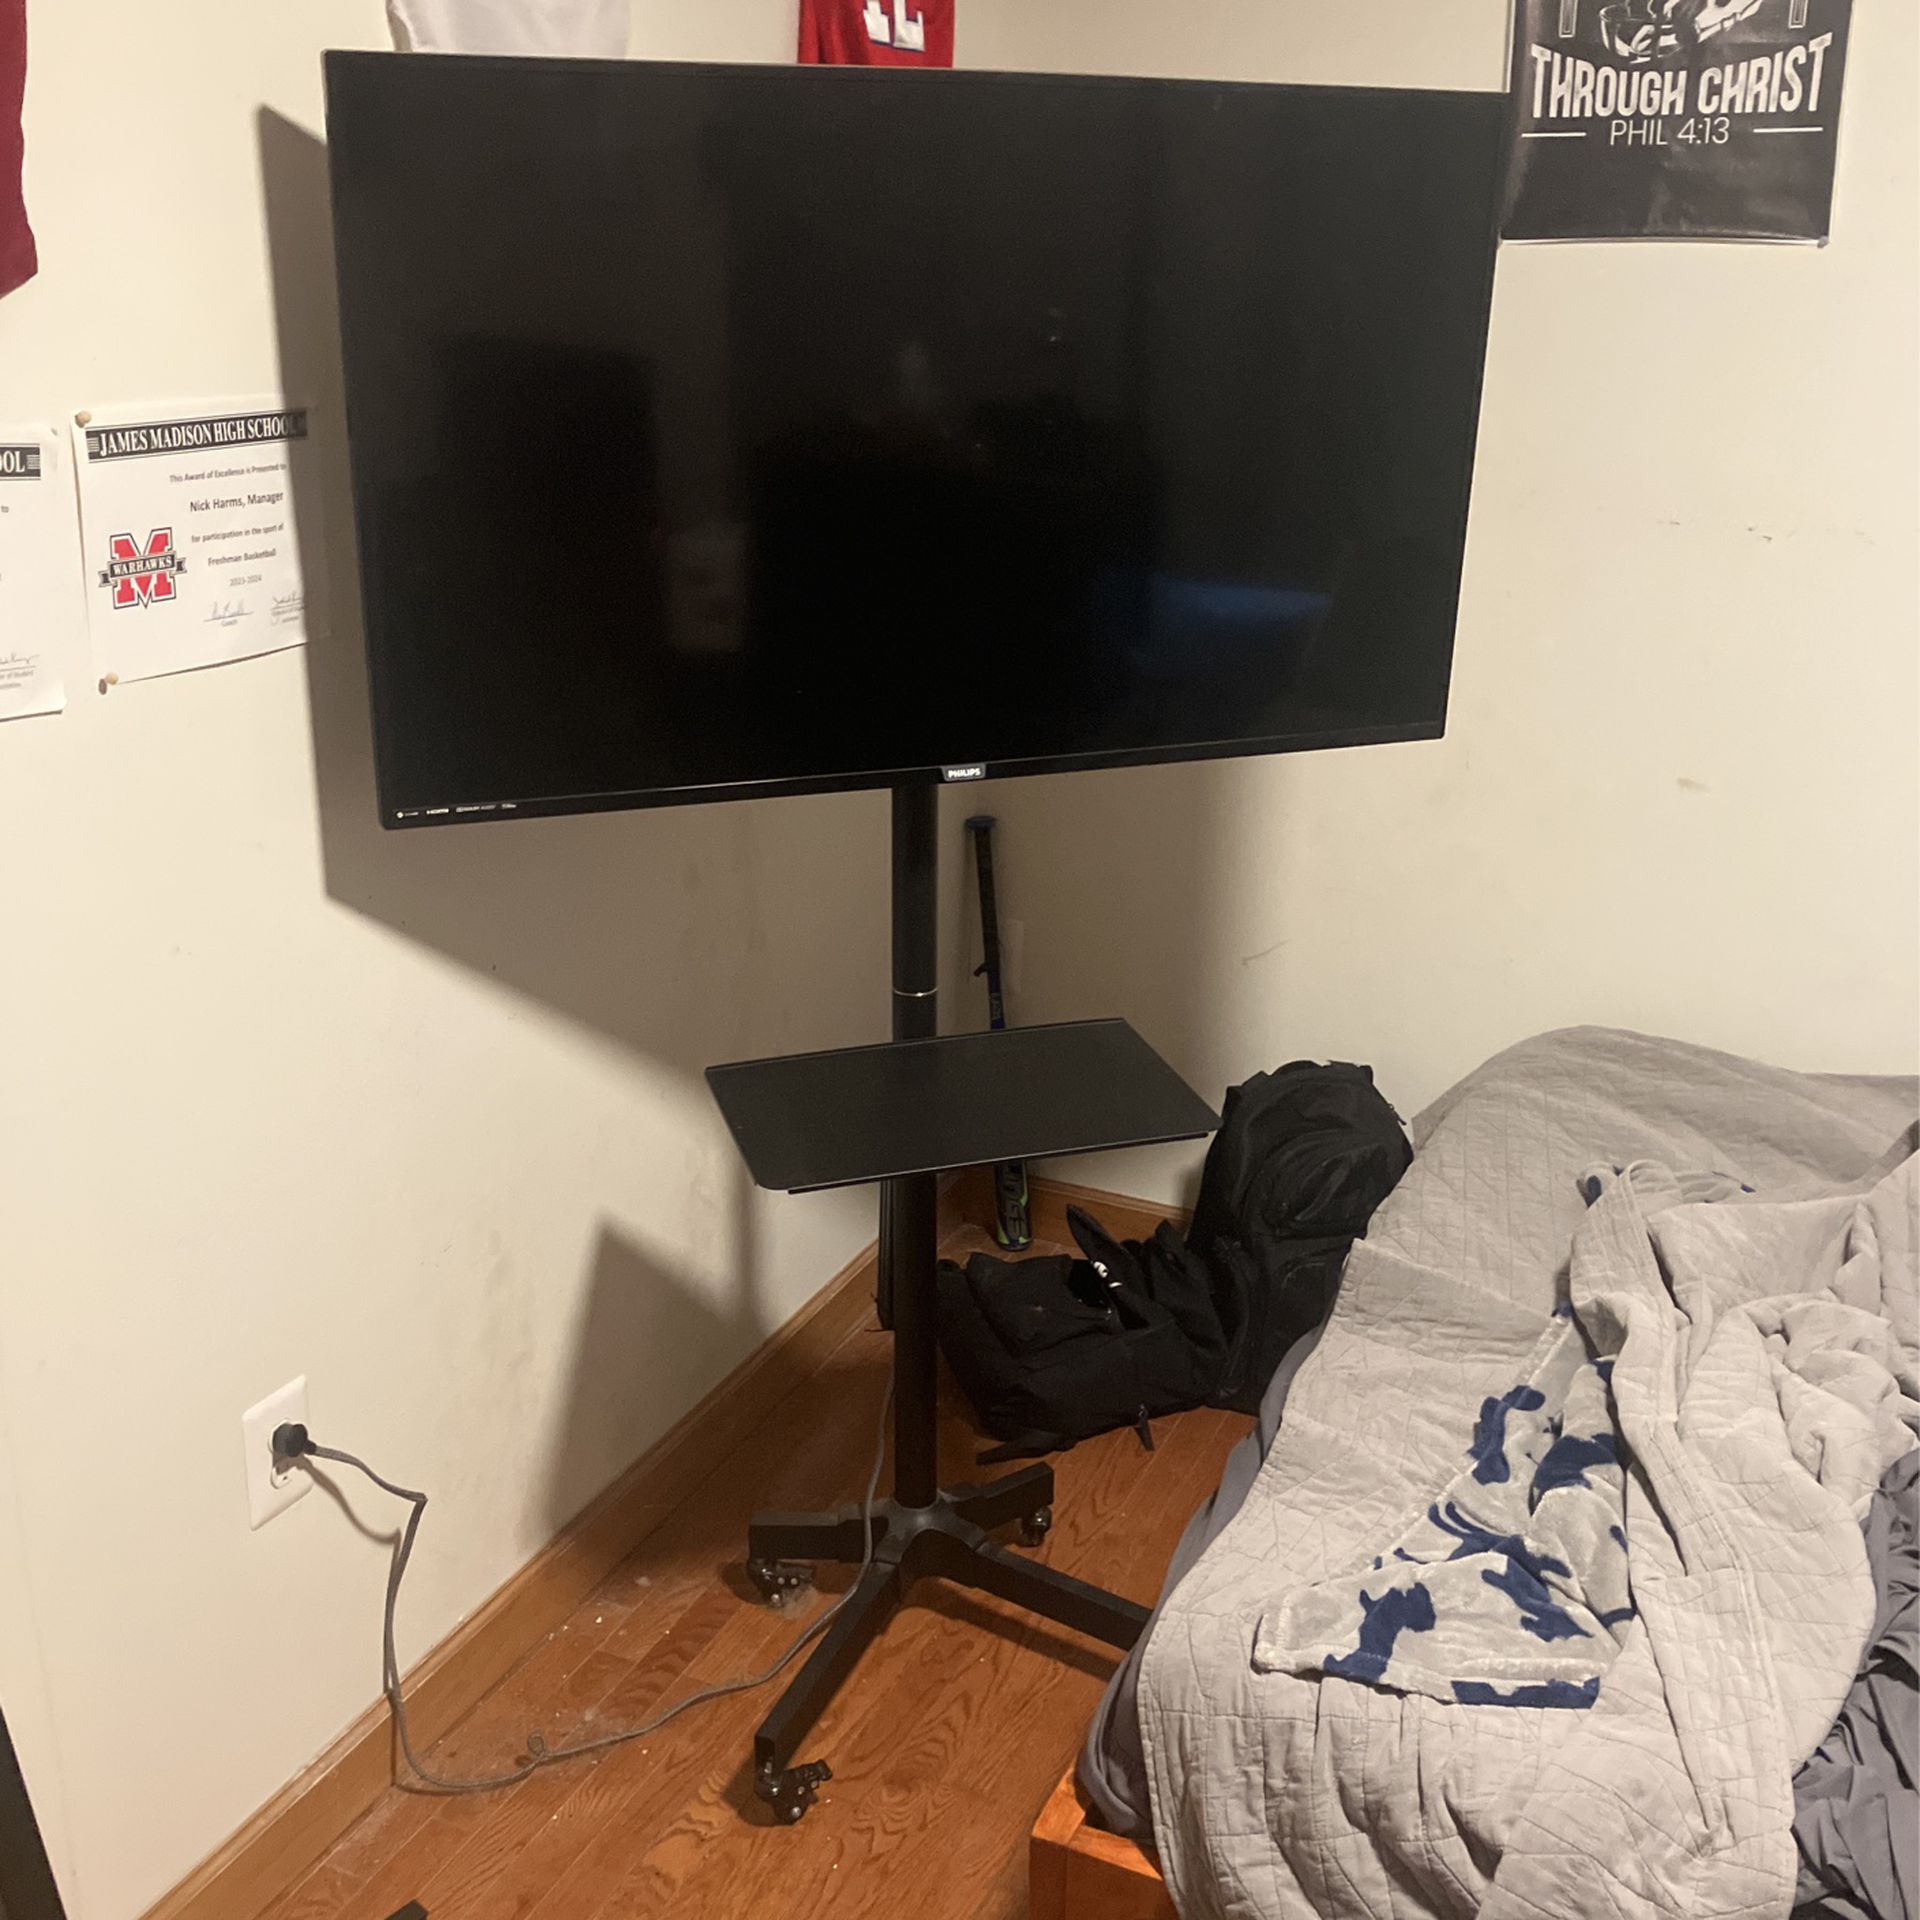 Philips 44 inch TV (with a stand and a extension cord)